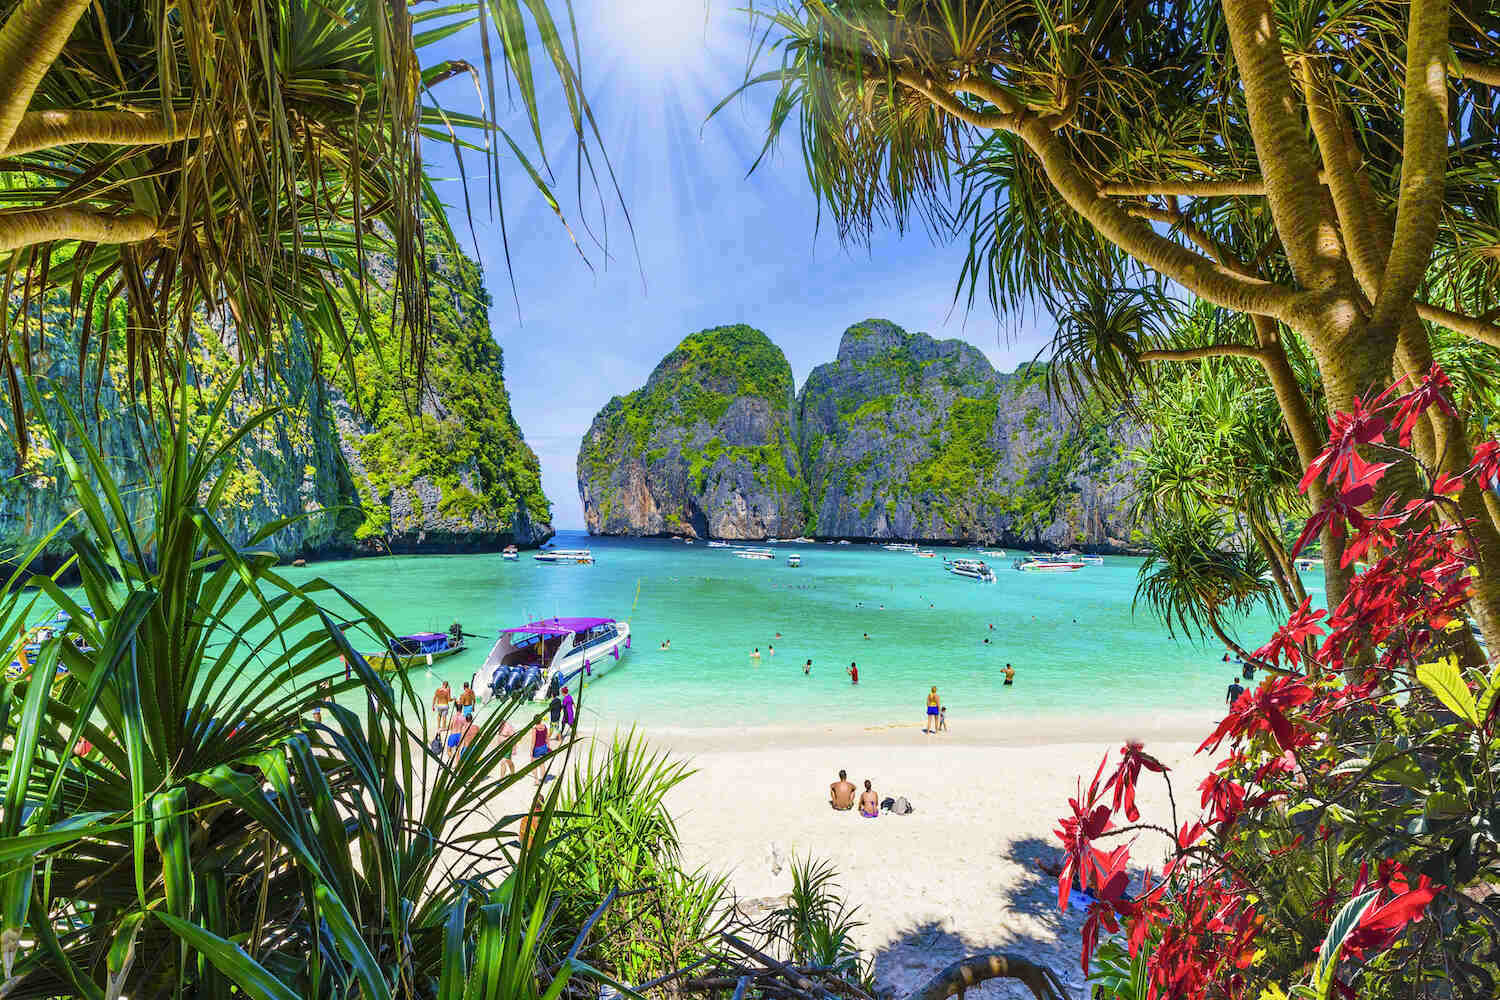 Maya Bay in southern Thailand with tropical setting, turquoise water and tourists on the beach